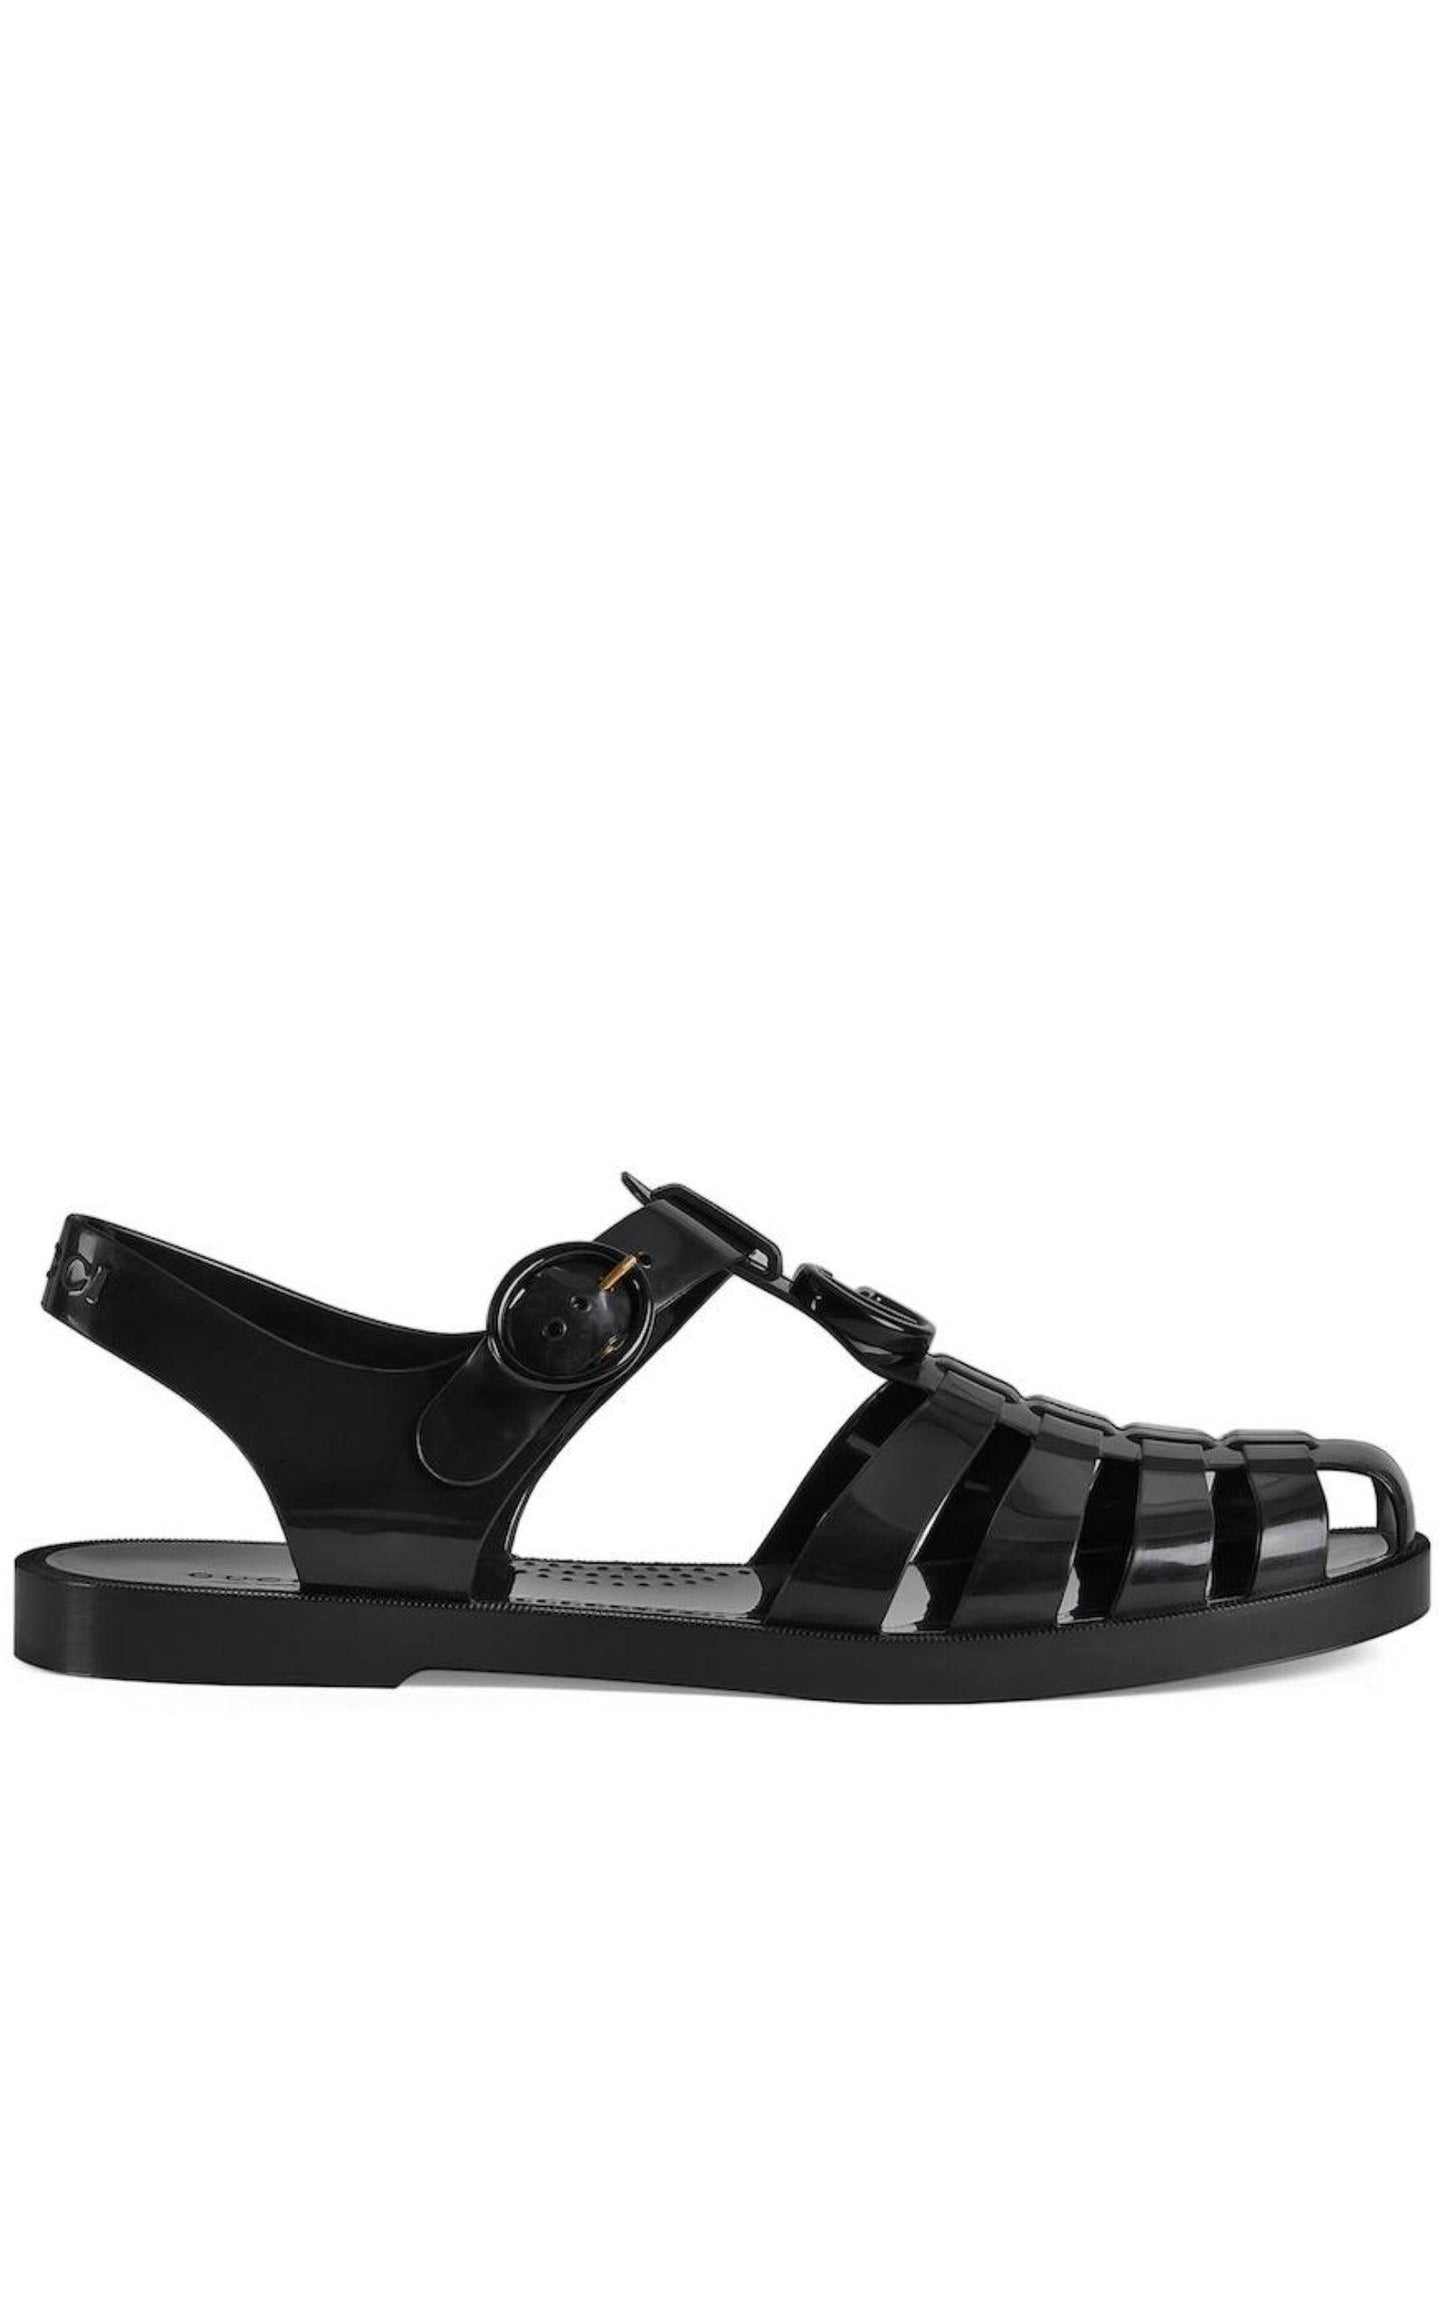  GucciGG Logo Cut-Out Strapped Sandals - Runway Catalog